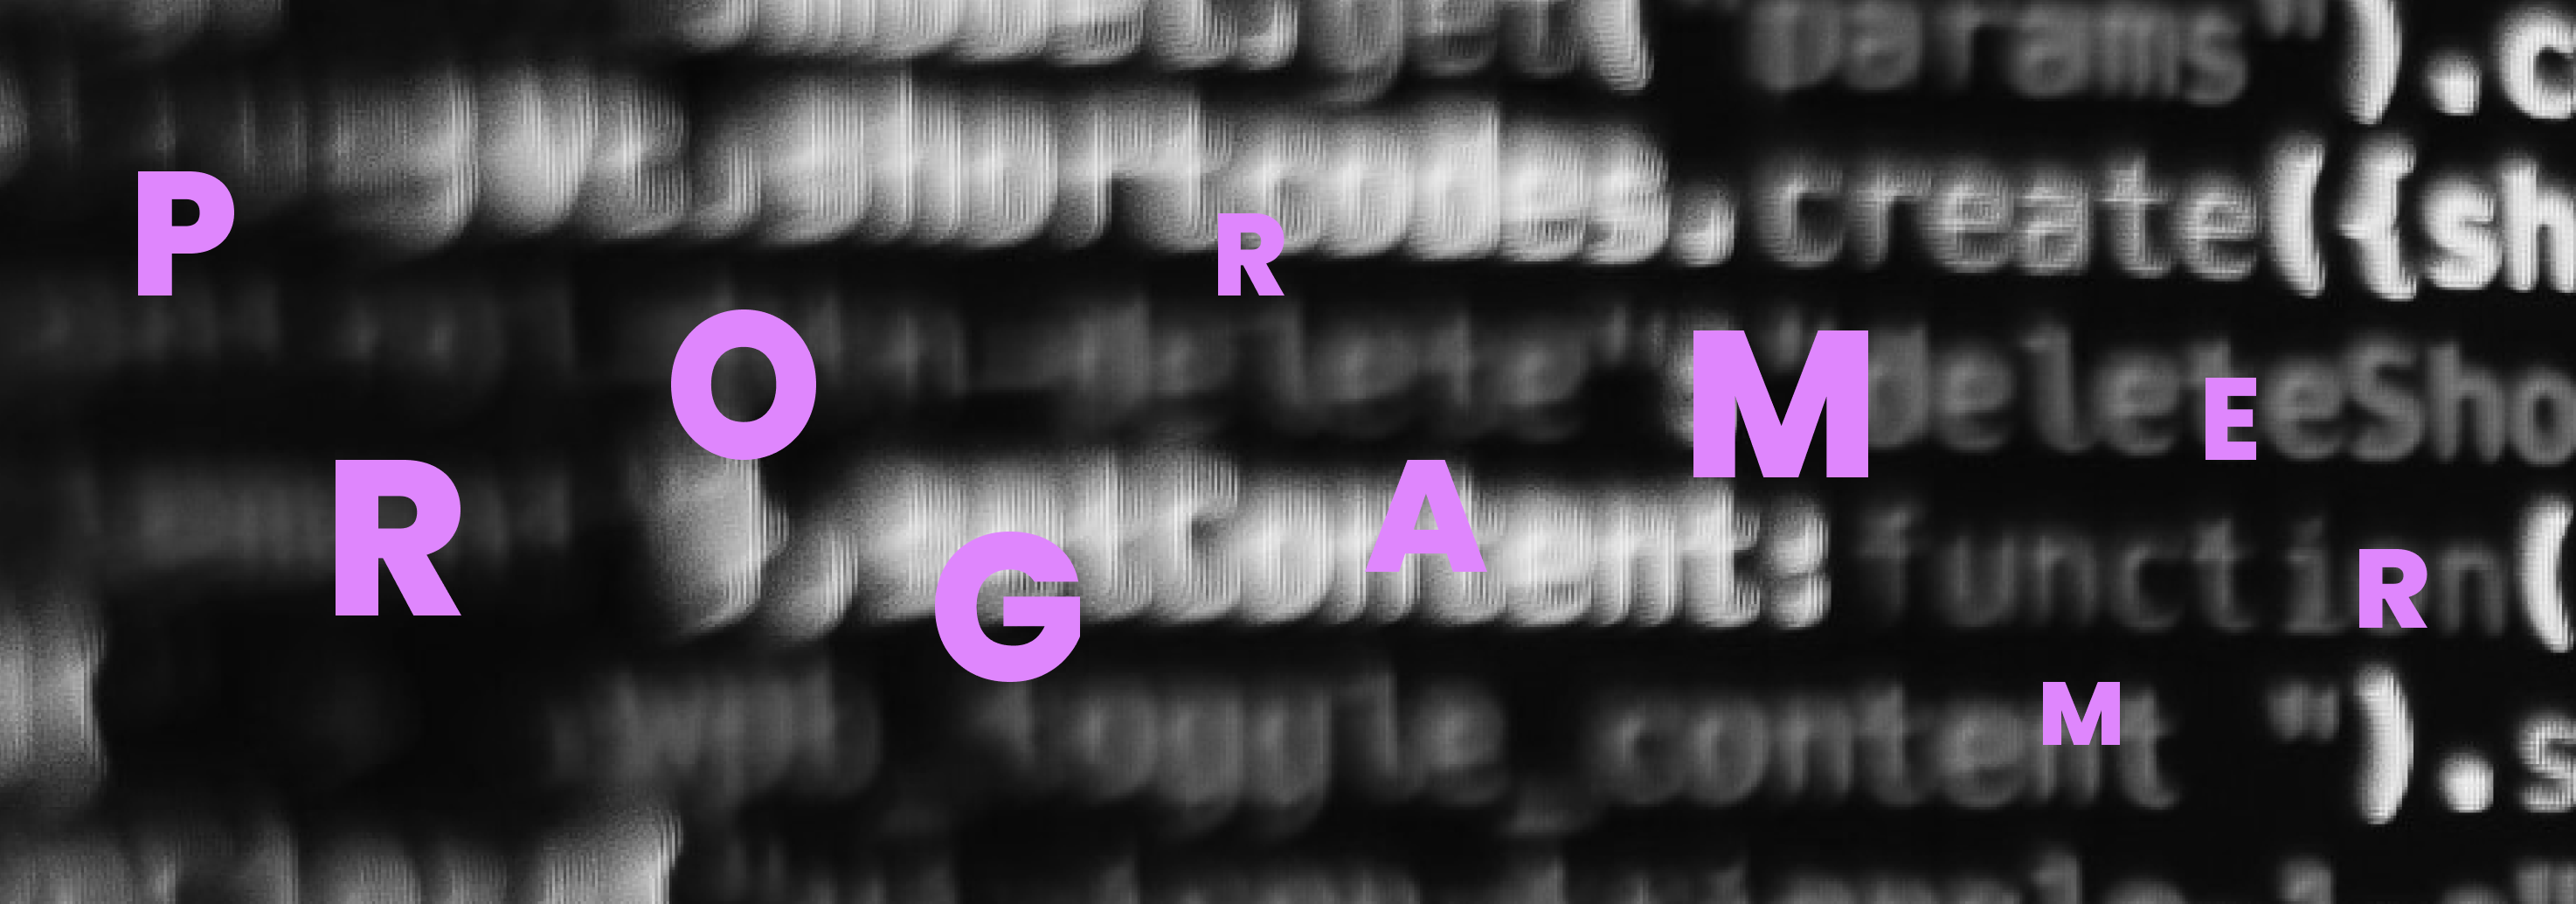 Image includes scattered purple text spelling PROGRAMMER on a black and white background image of blurred line of code